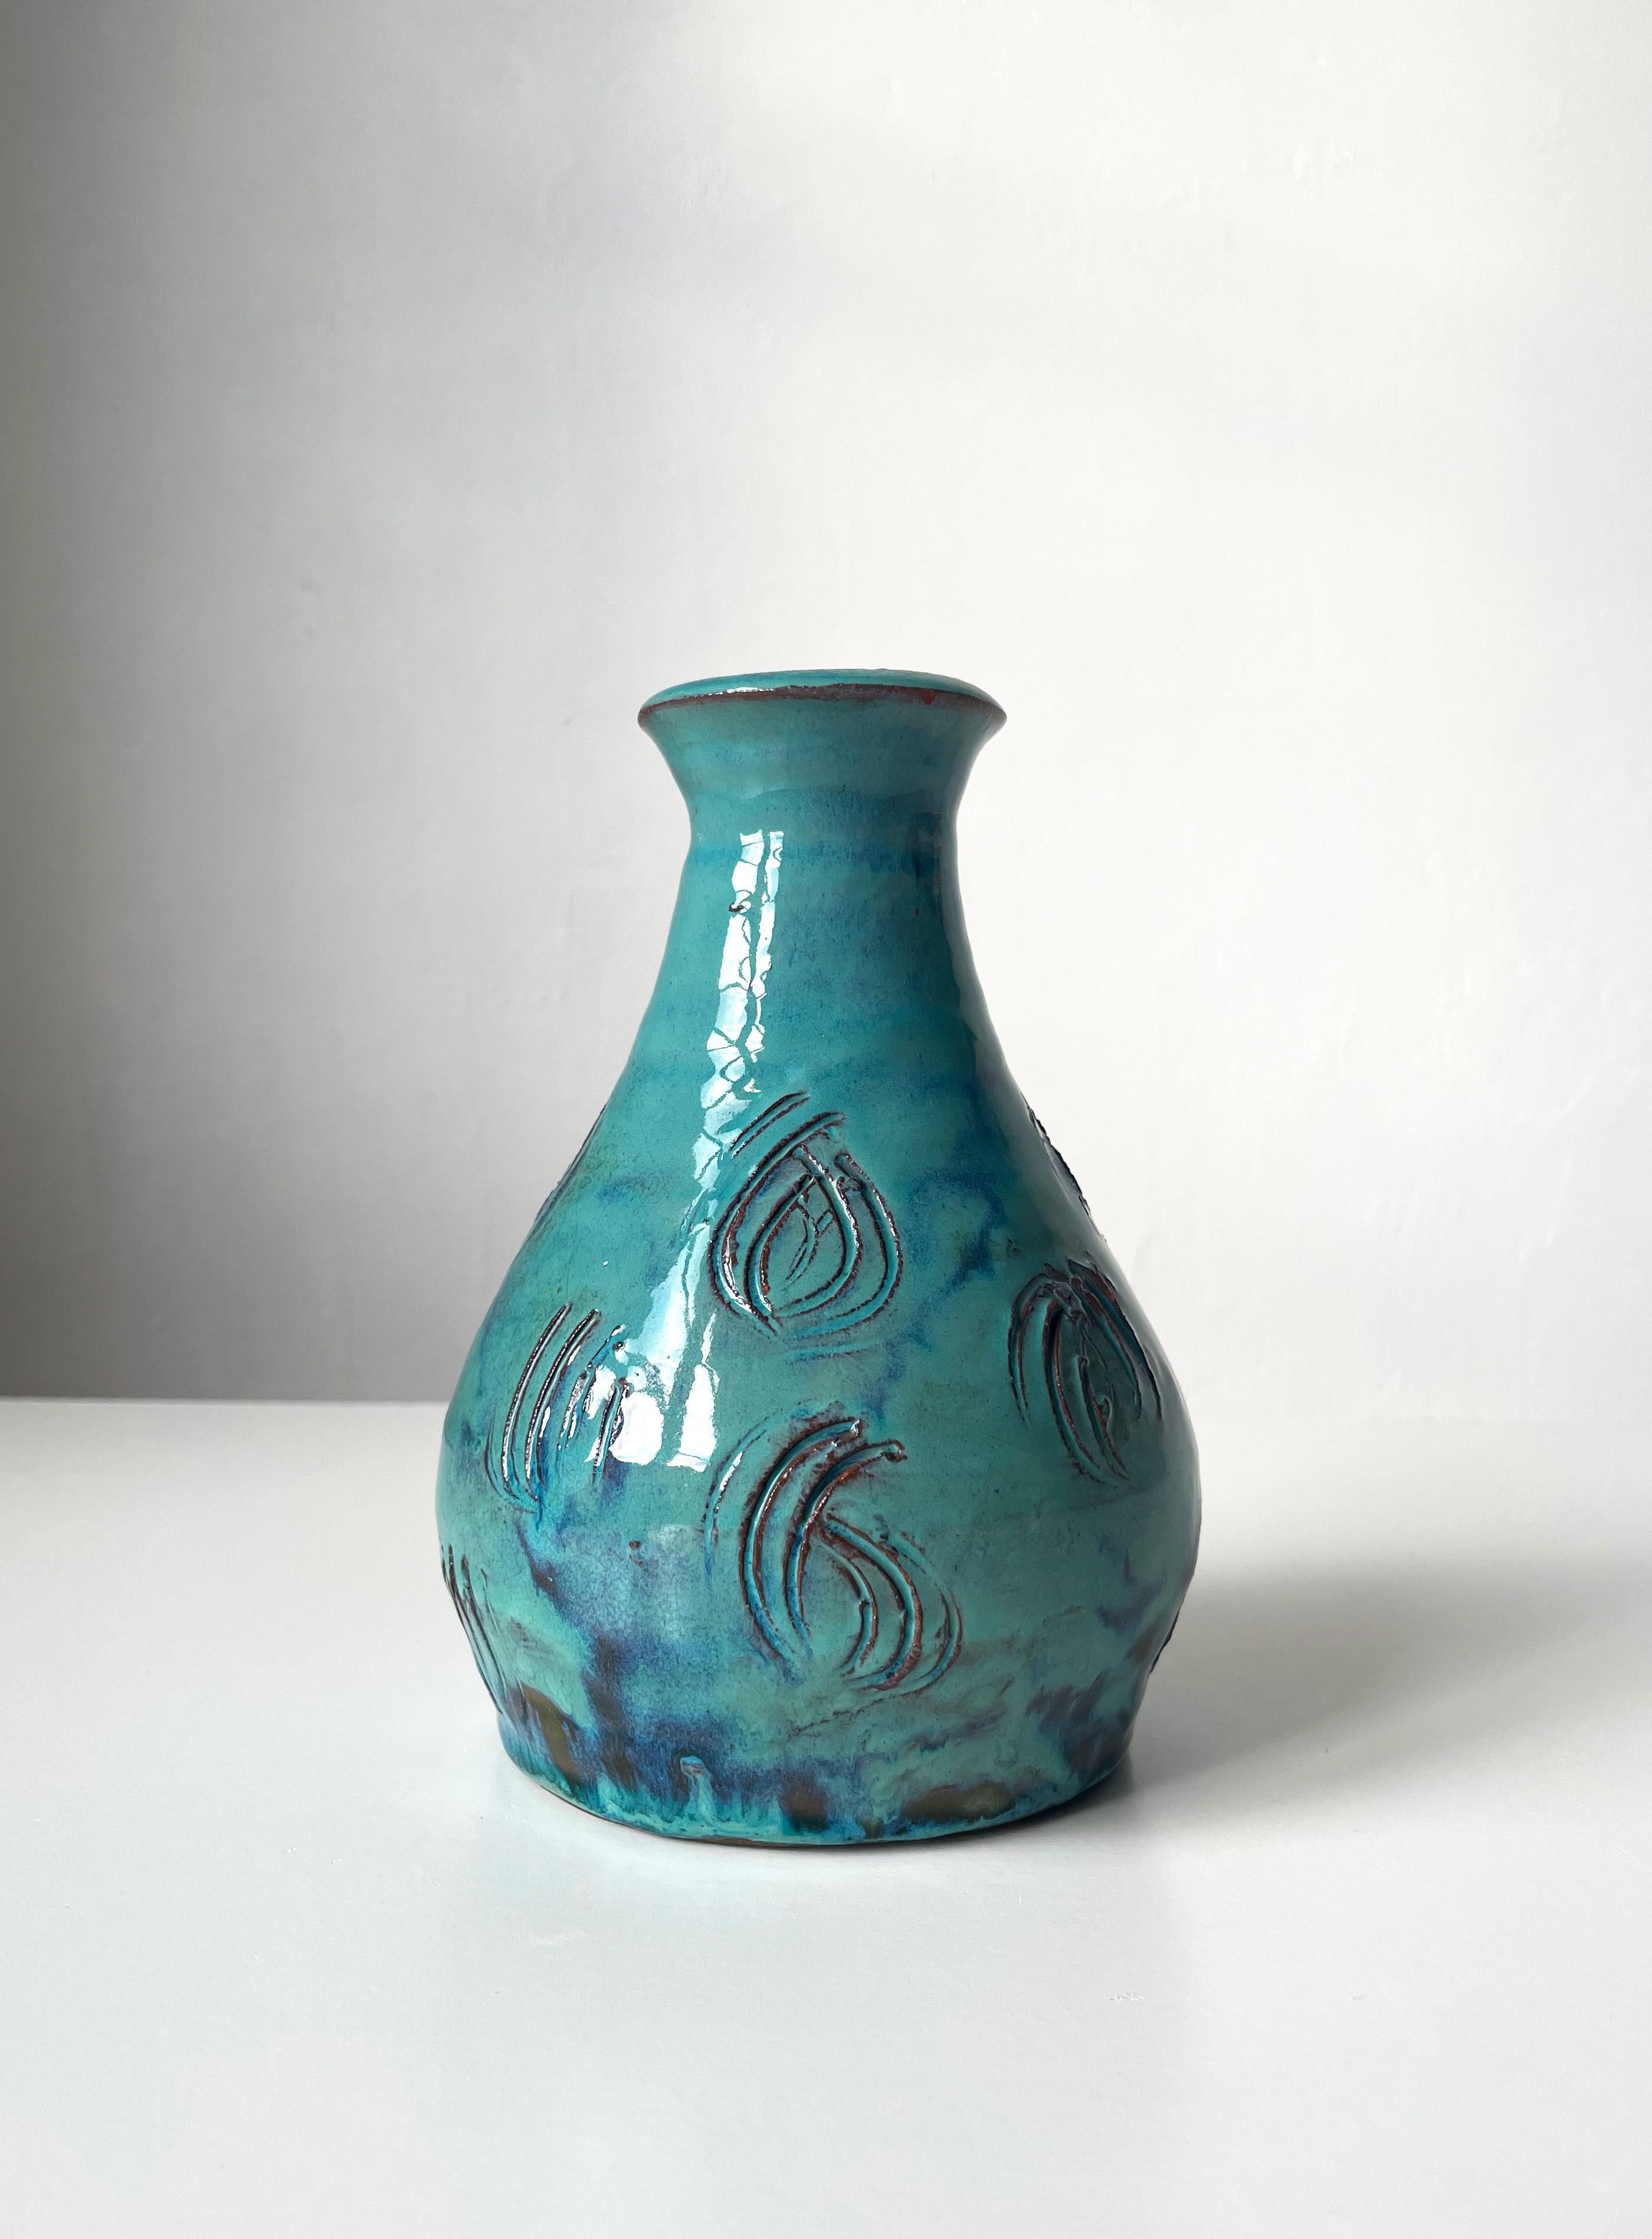 Scandinavian modern vintage turquoise and black handmade ceramic vase. Incised lined pattern in double semicircles decorating the item. Thick running glaze in turquoise, blue, aqua and black colors cover the soft shaped pottery. Great vintage